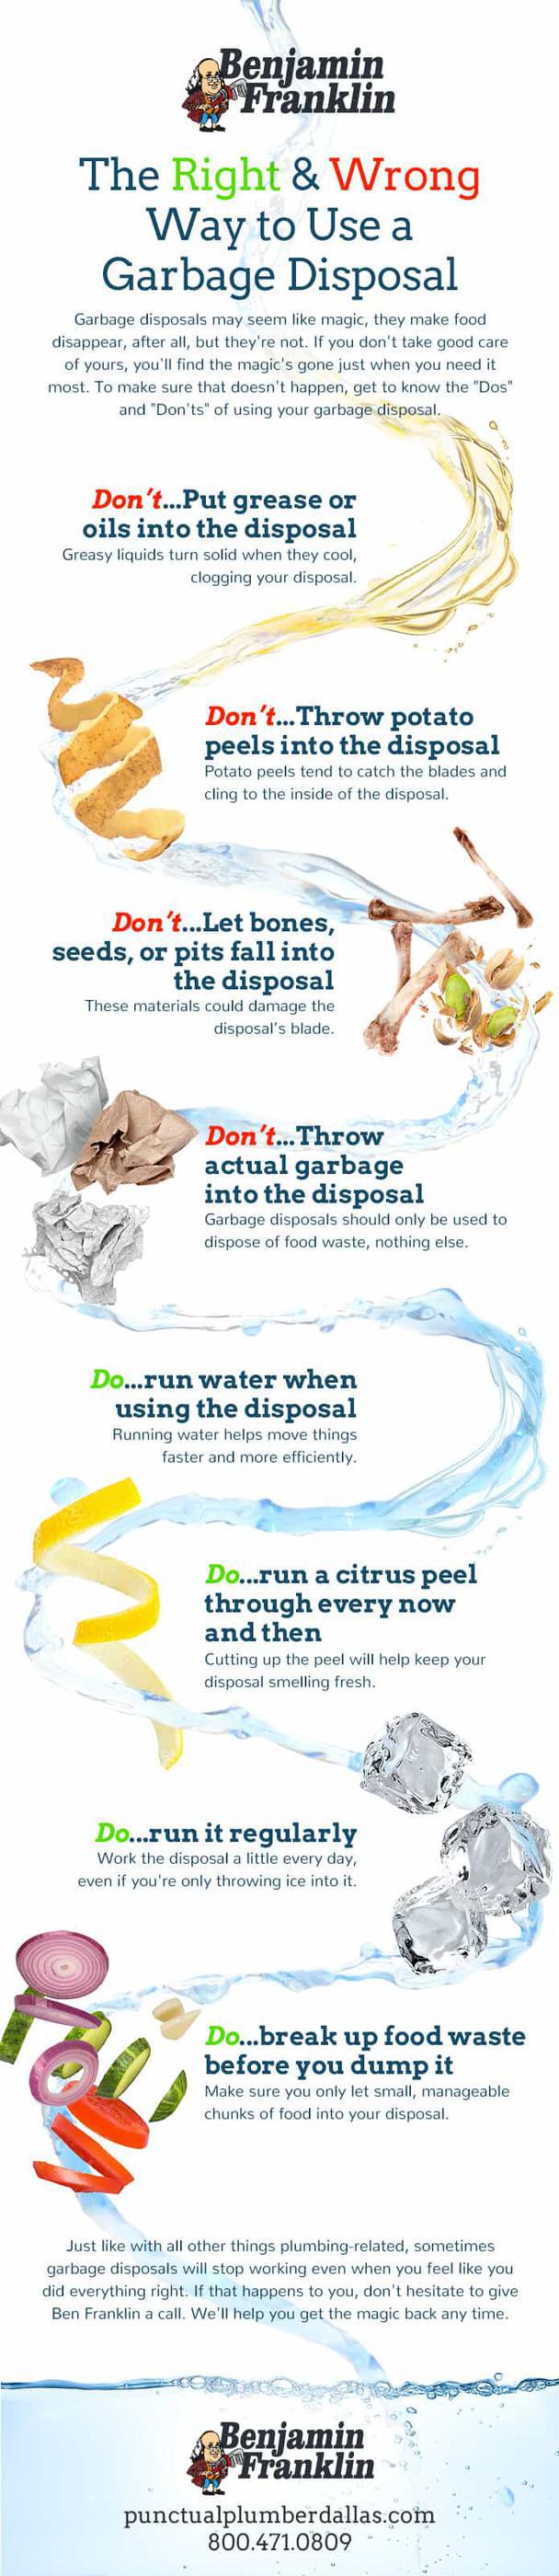 The Right & Wrong Way to Use a Garbage Disposal [INFOGRAPHIC]